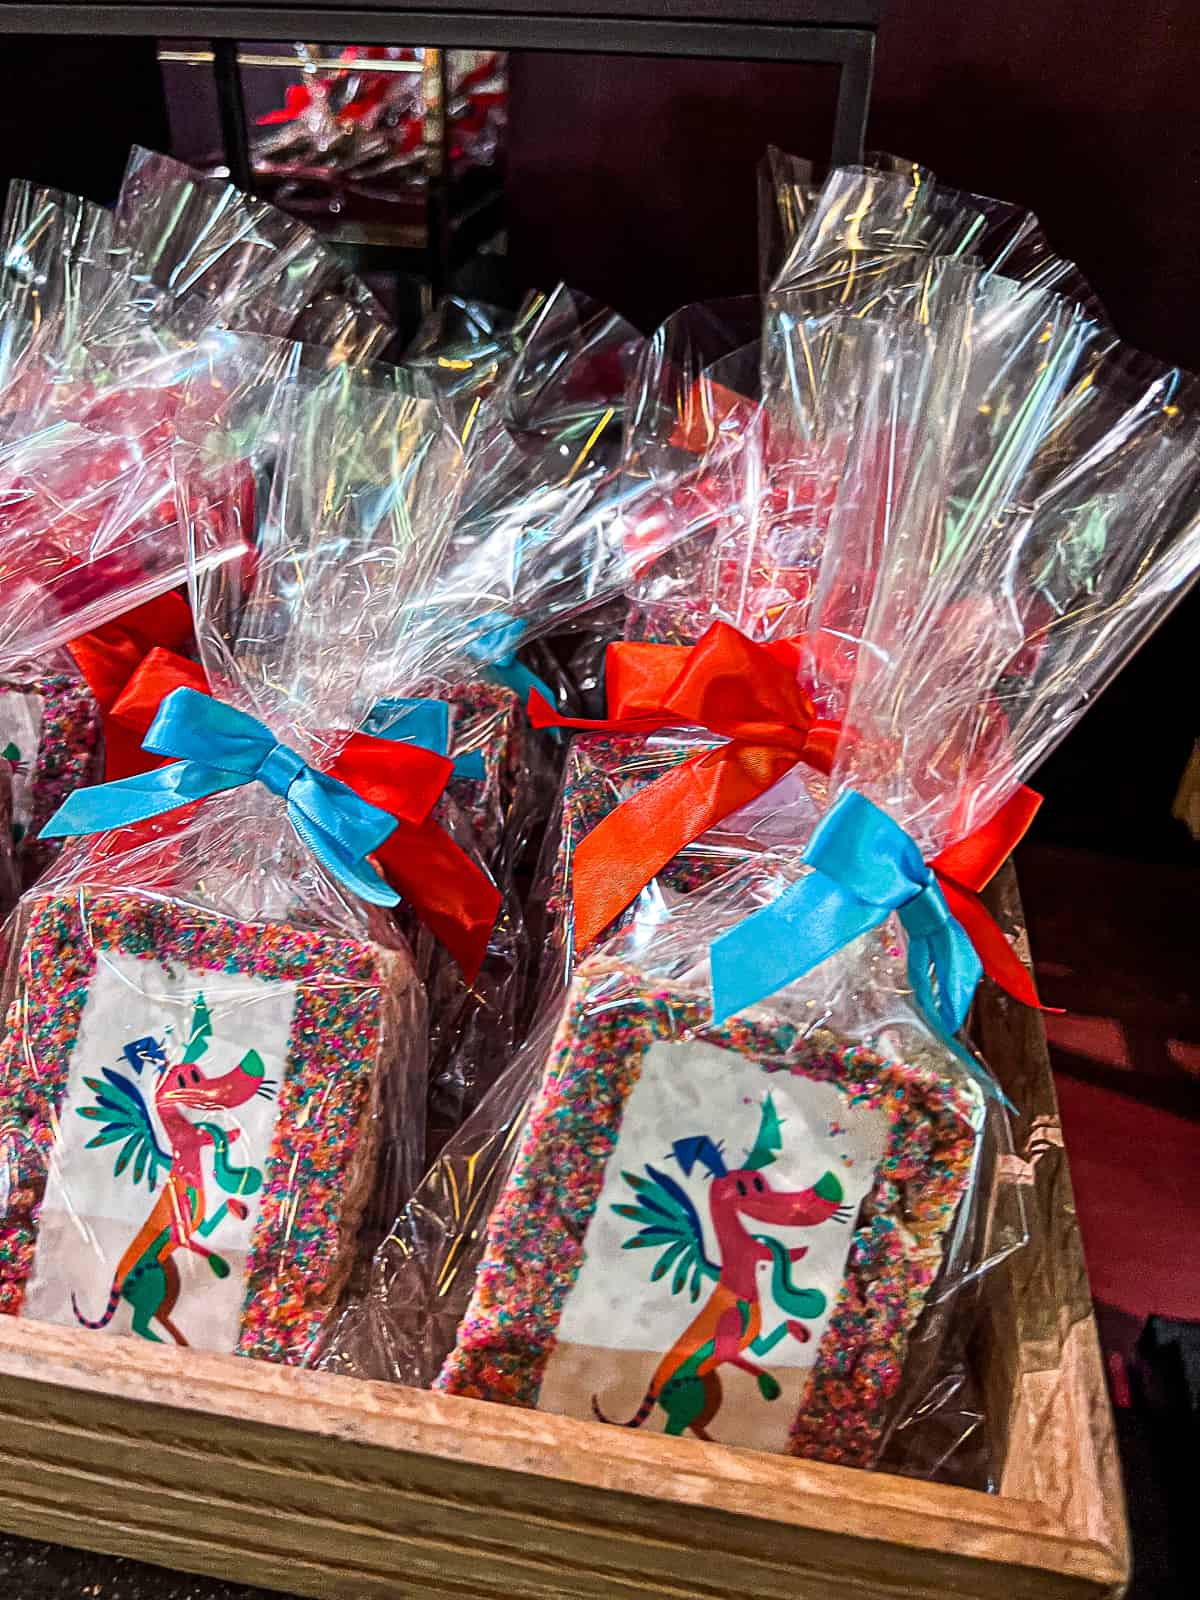 Dante Coco Character Day of the Dead Rice Krispie Treats at Disneyland